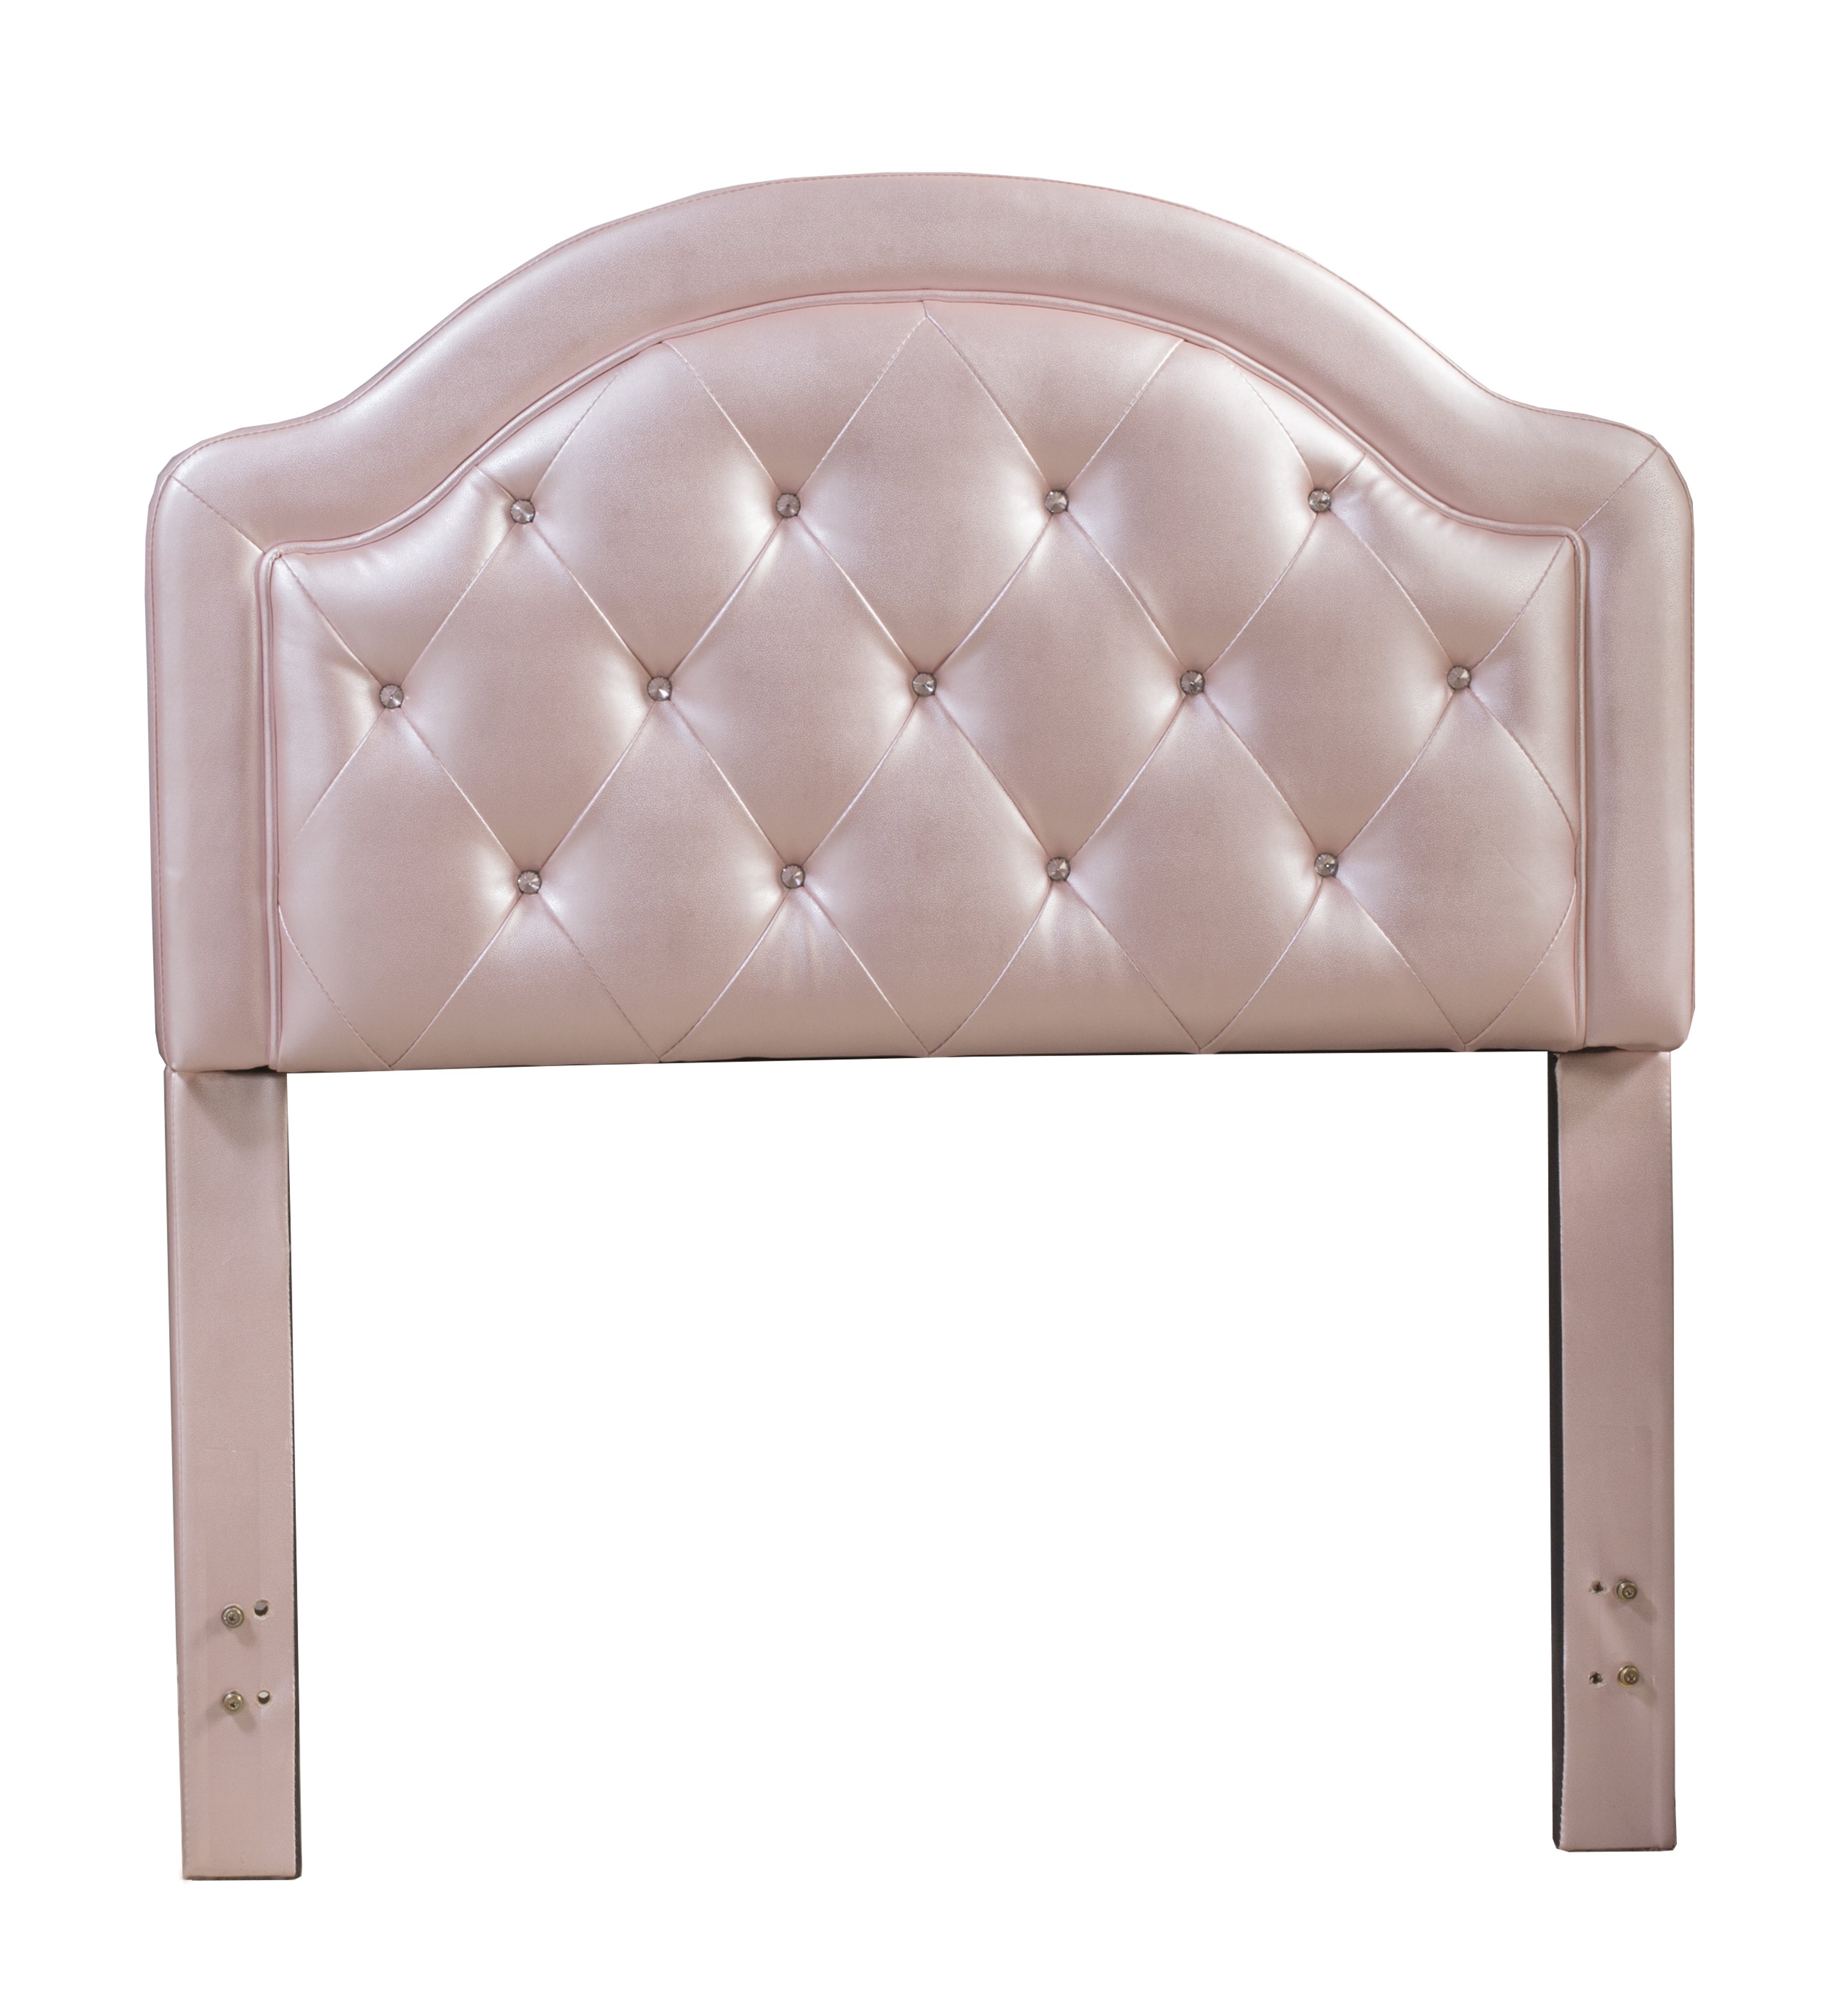 Hillsdale Furniture Karley Tufted Faux Leather Twin Headboard, Embossed Pink - image 2 of 5